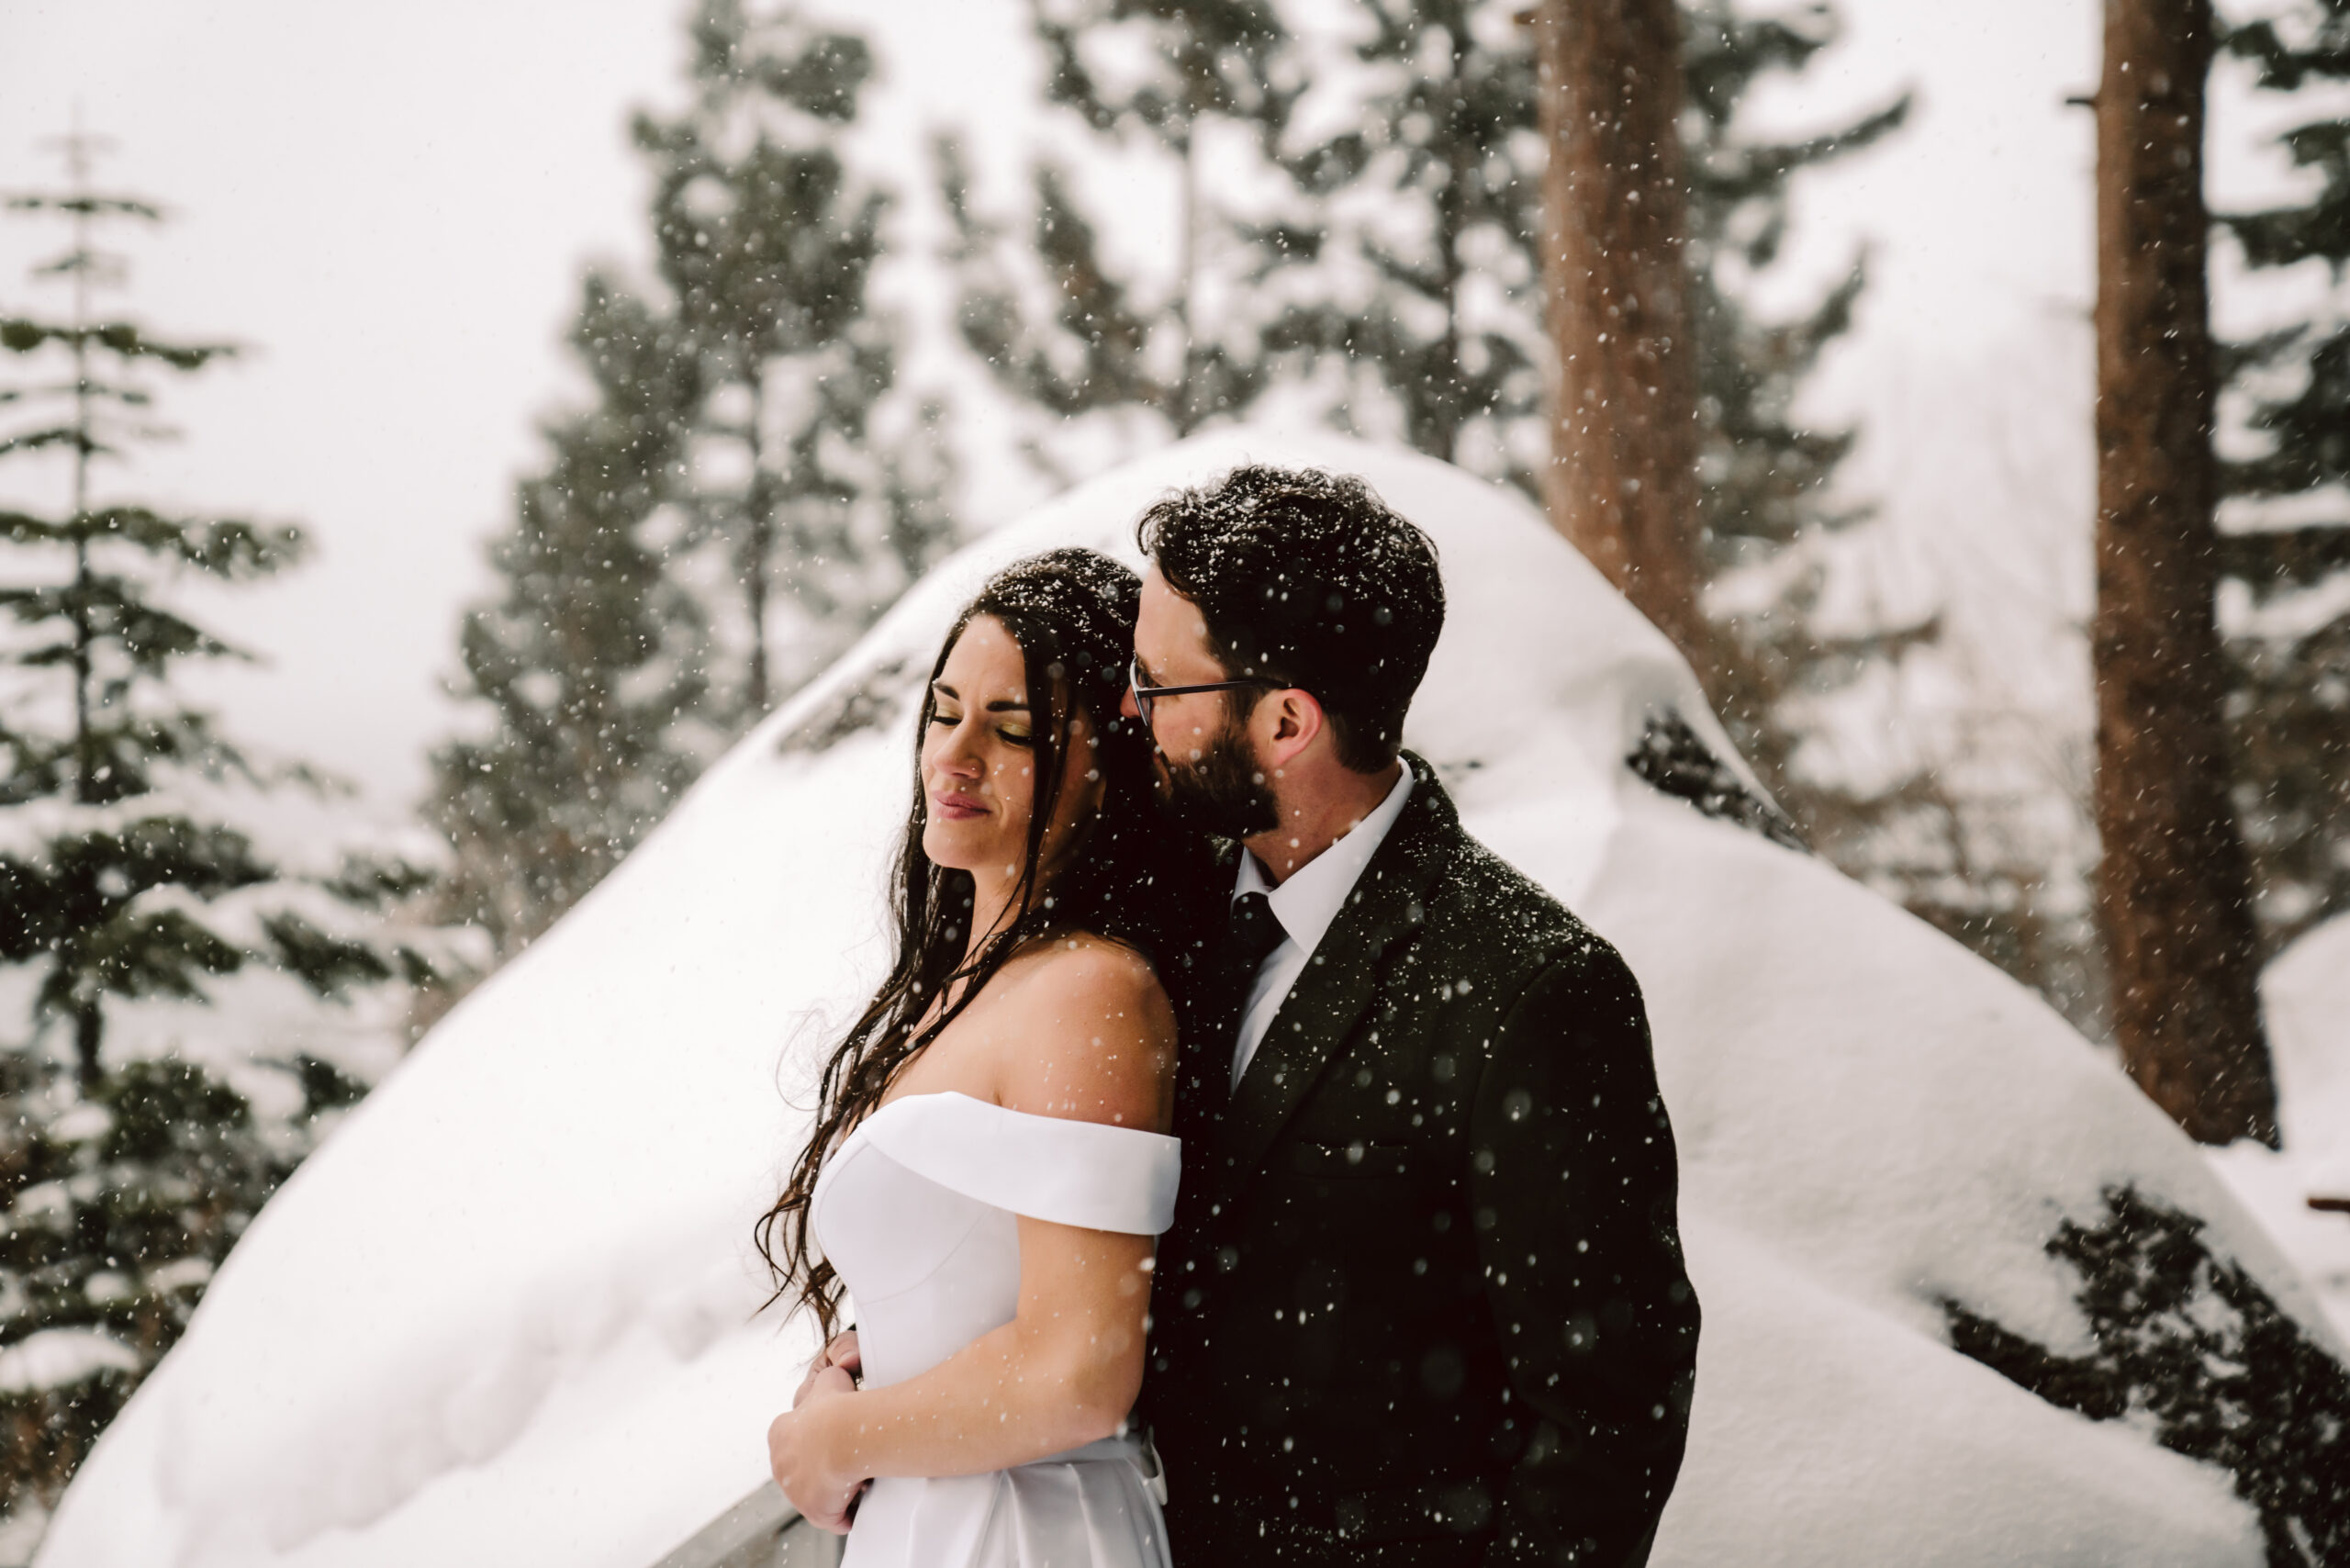 A groom holding his bride from behind and snow falling on their faces for a Winter wedding in Tahoe